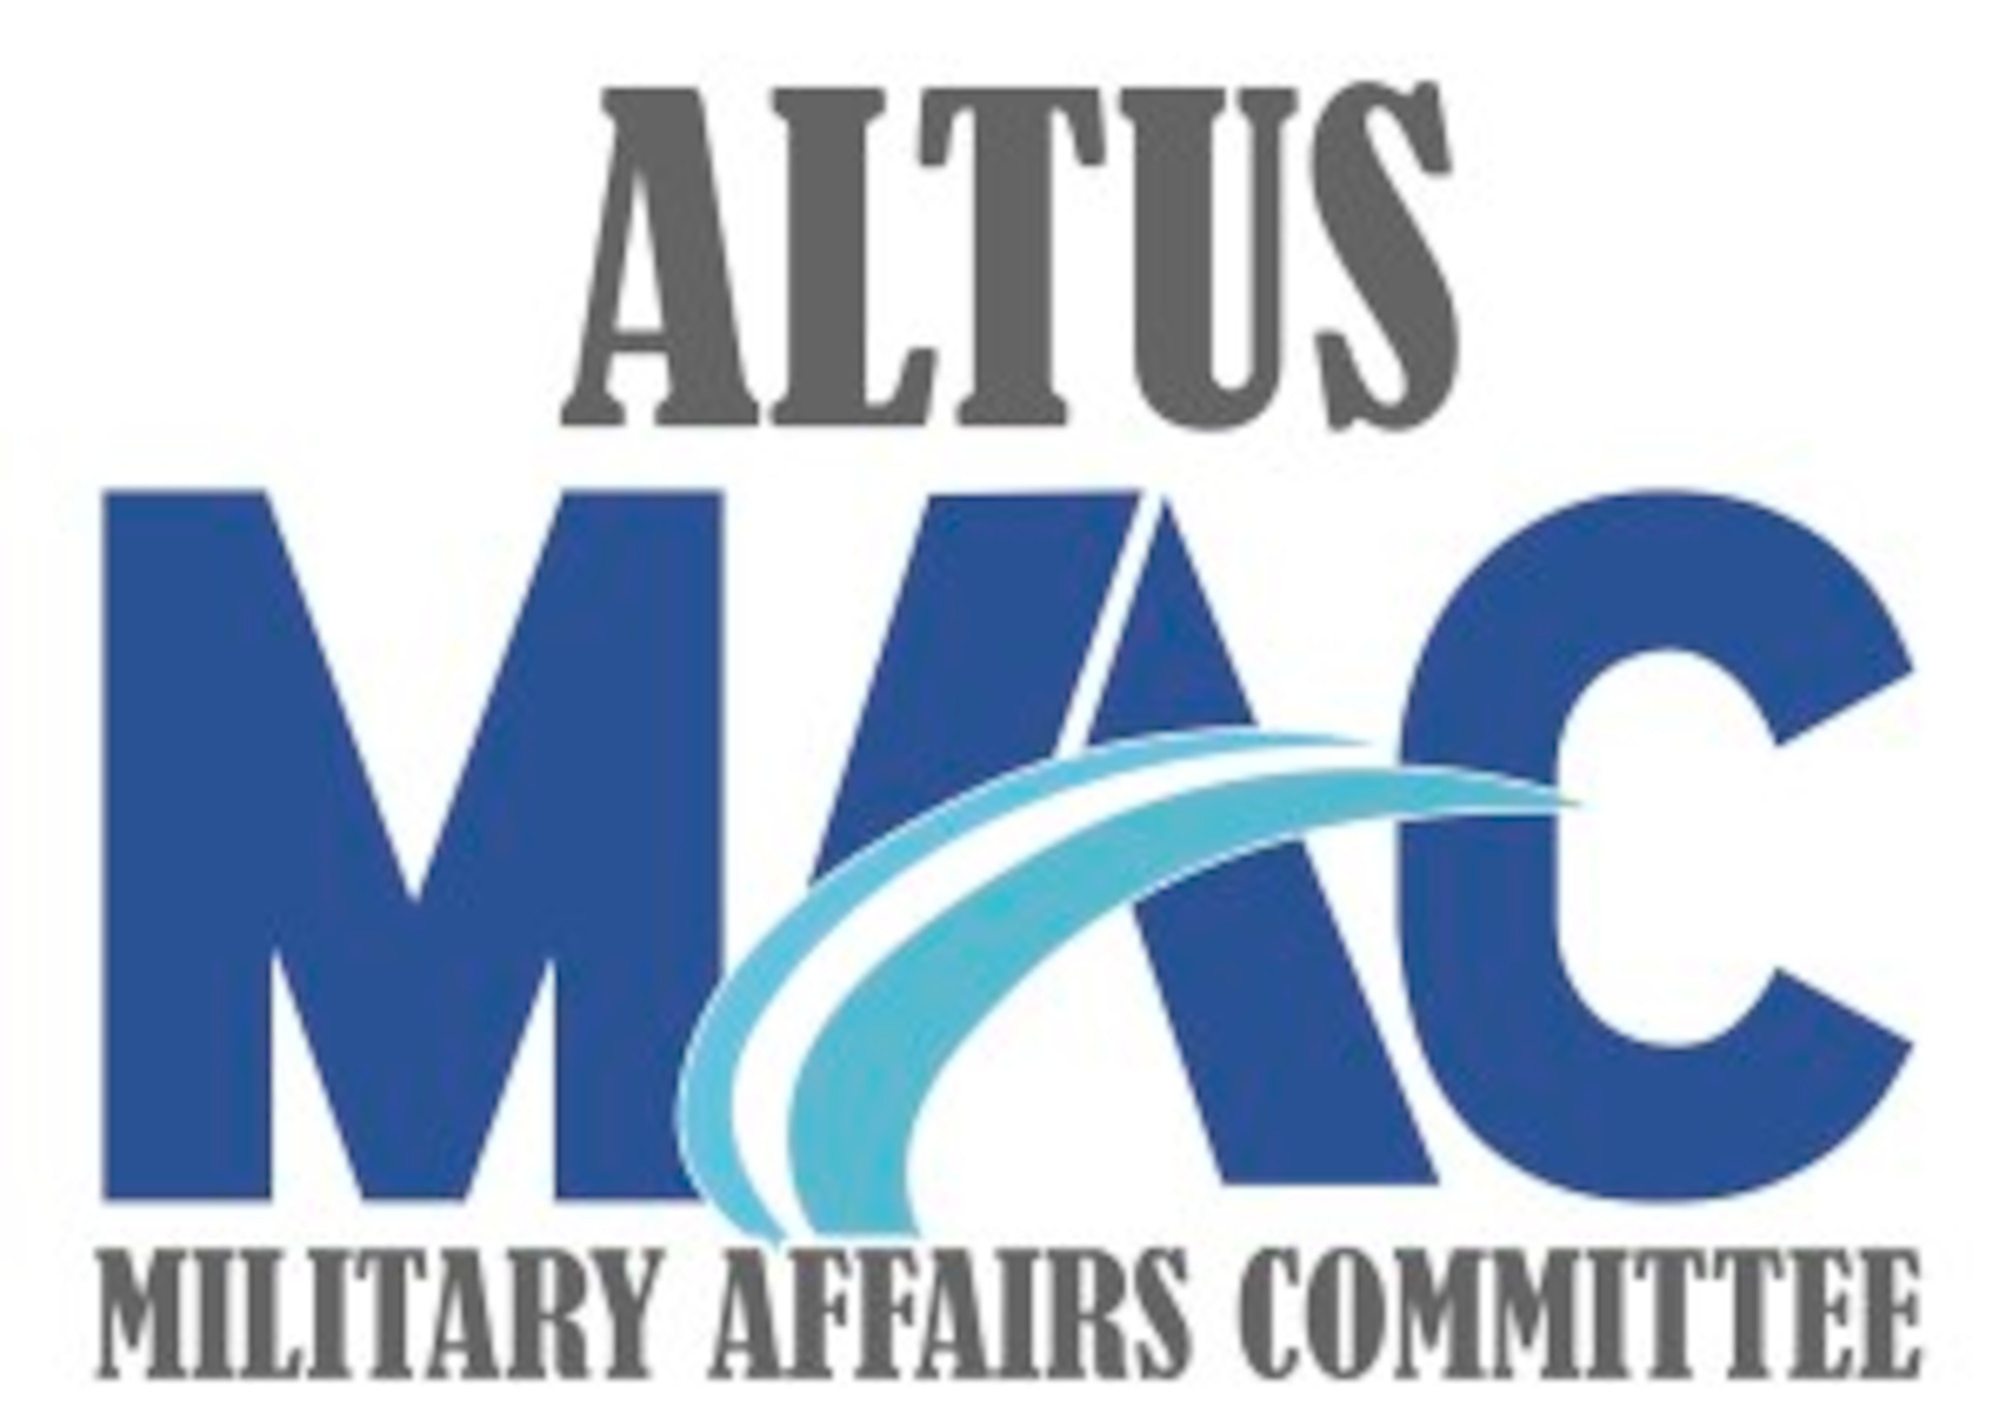 The Military Affairs Committee is a group of community leaders who work with military installations to do numerous events or petition on behalf of military members to improve quality of life.